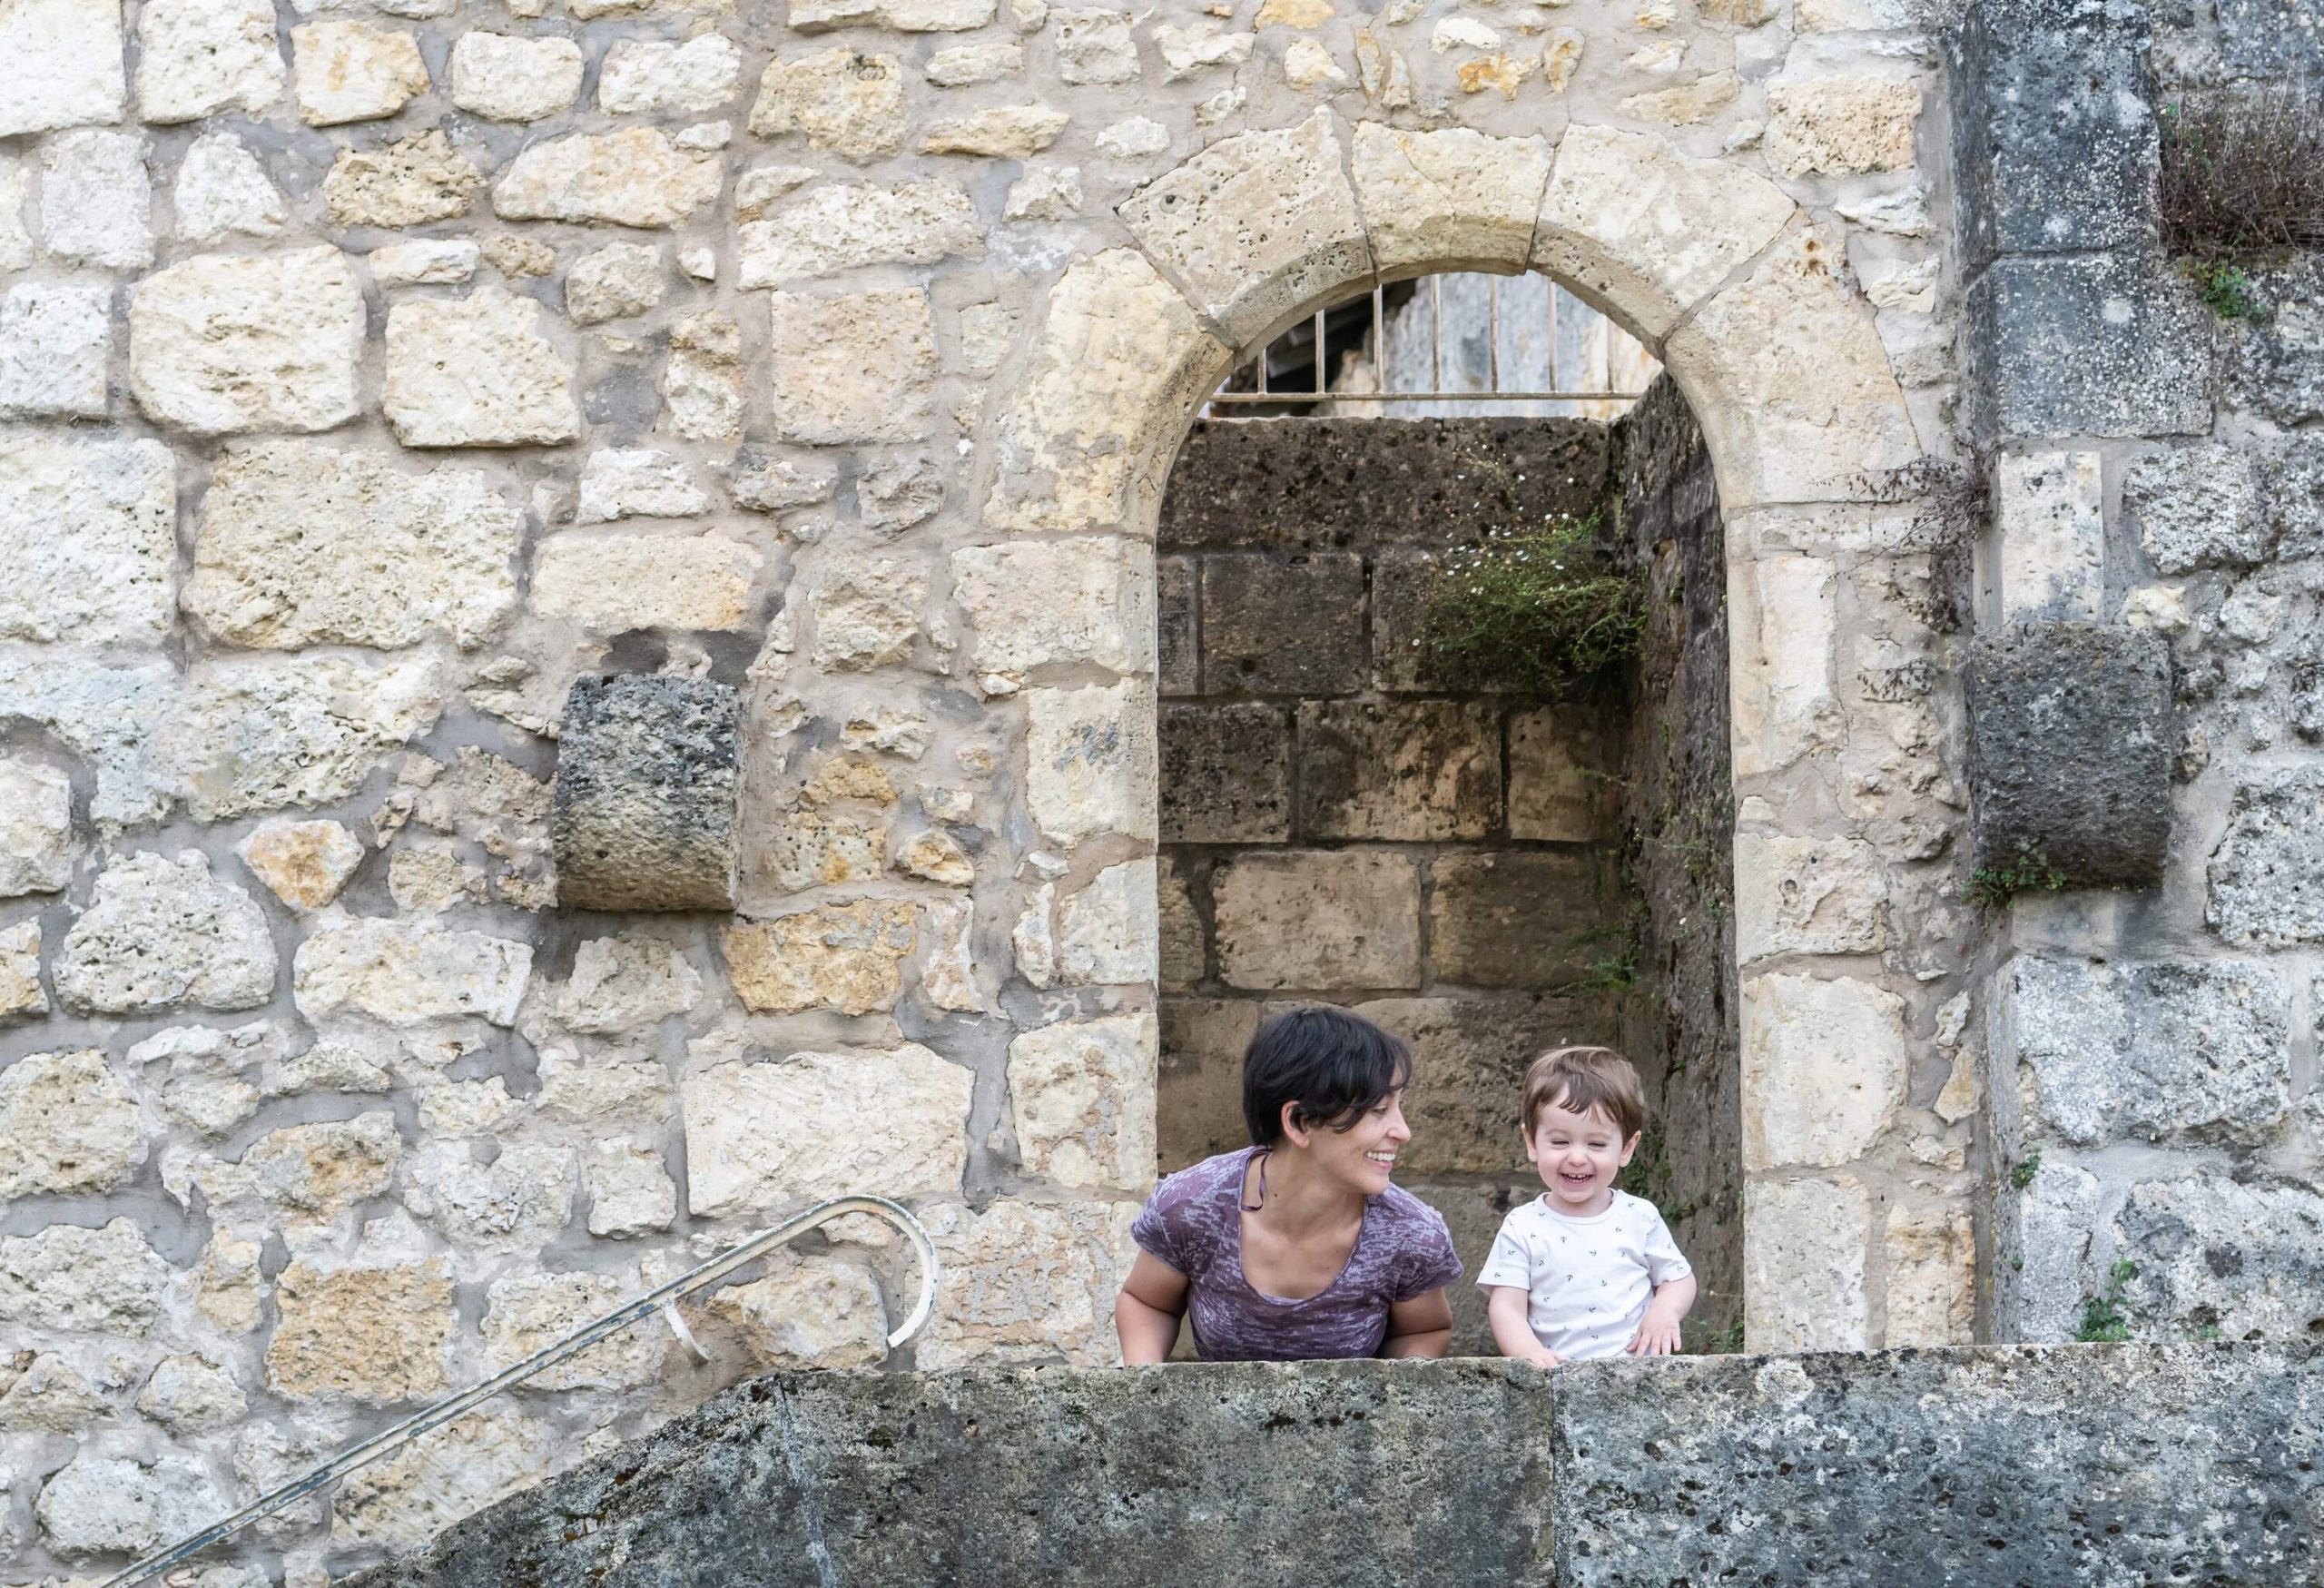 A mother looks at a boy smiling on a terrace under a limestone arch.